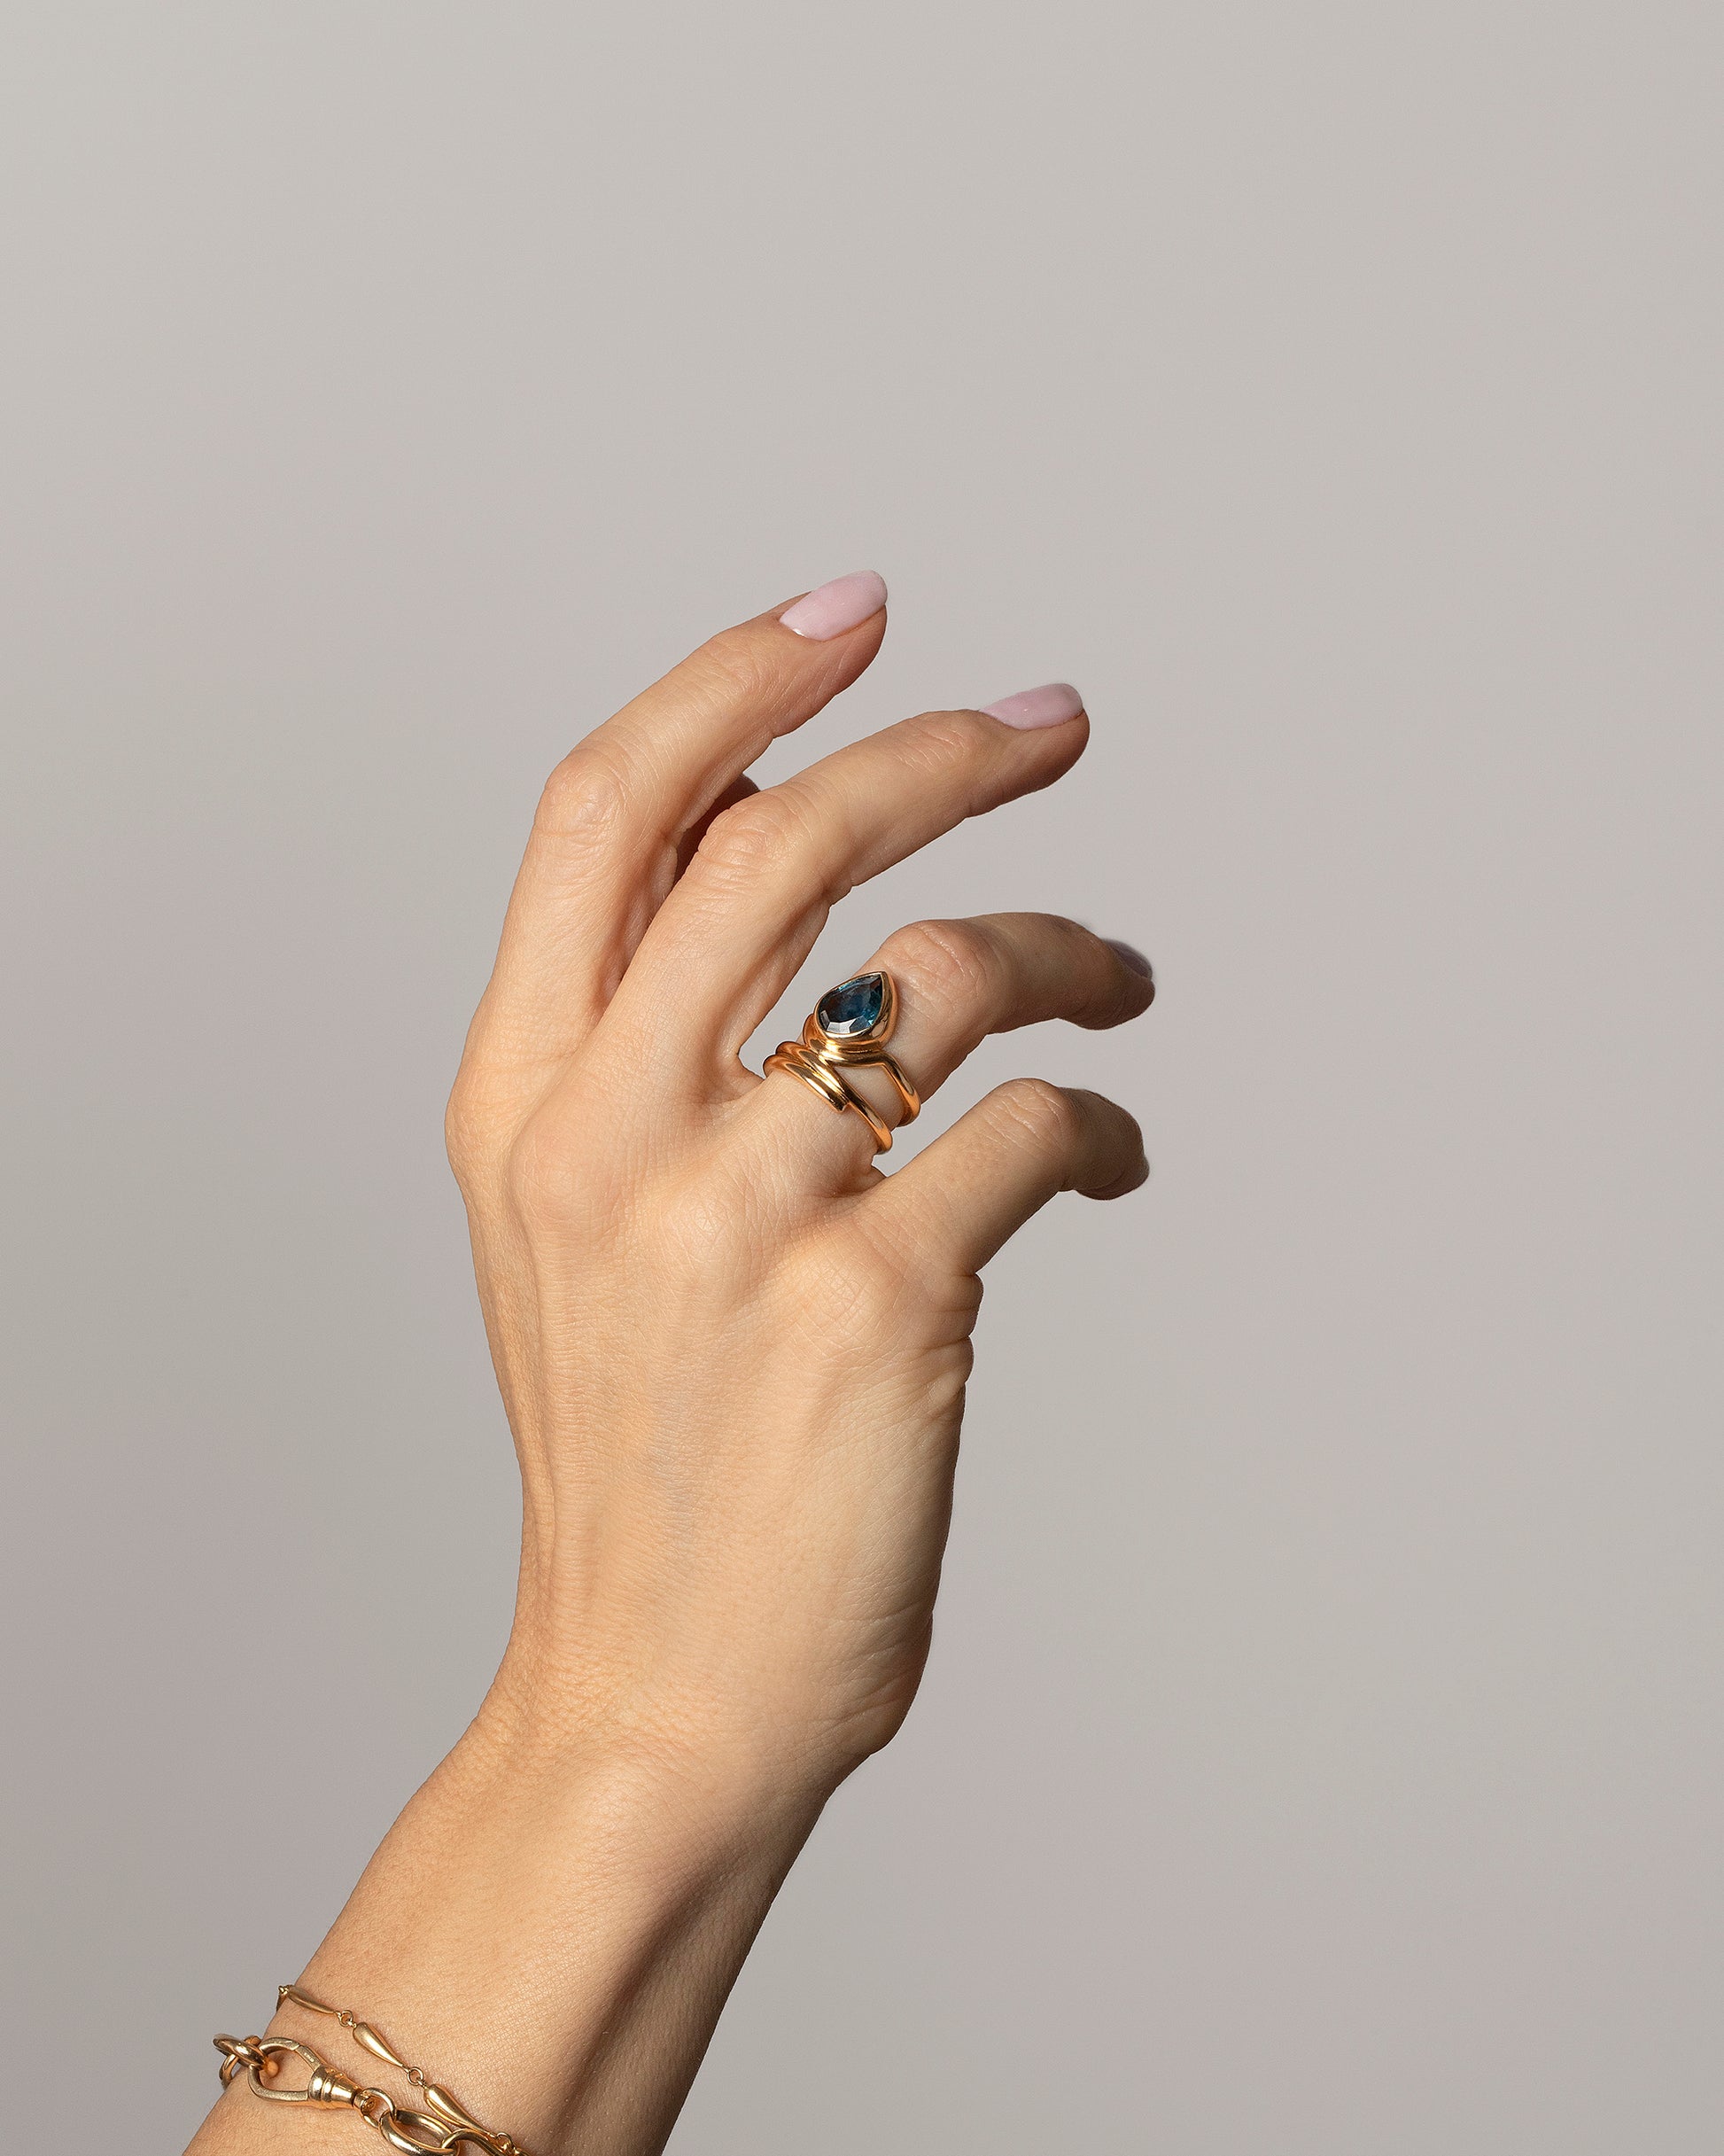 Editorial photo of model wearing the Bell Ring.